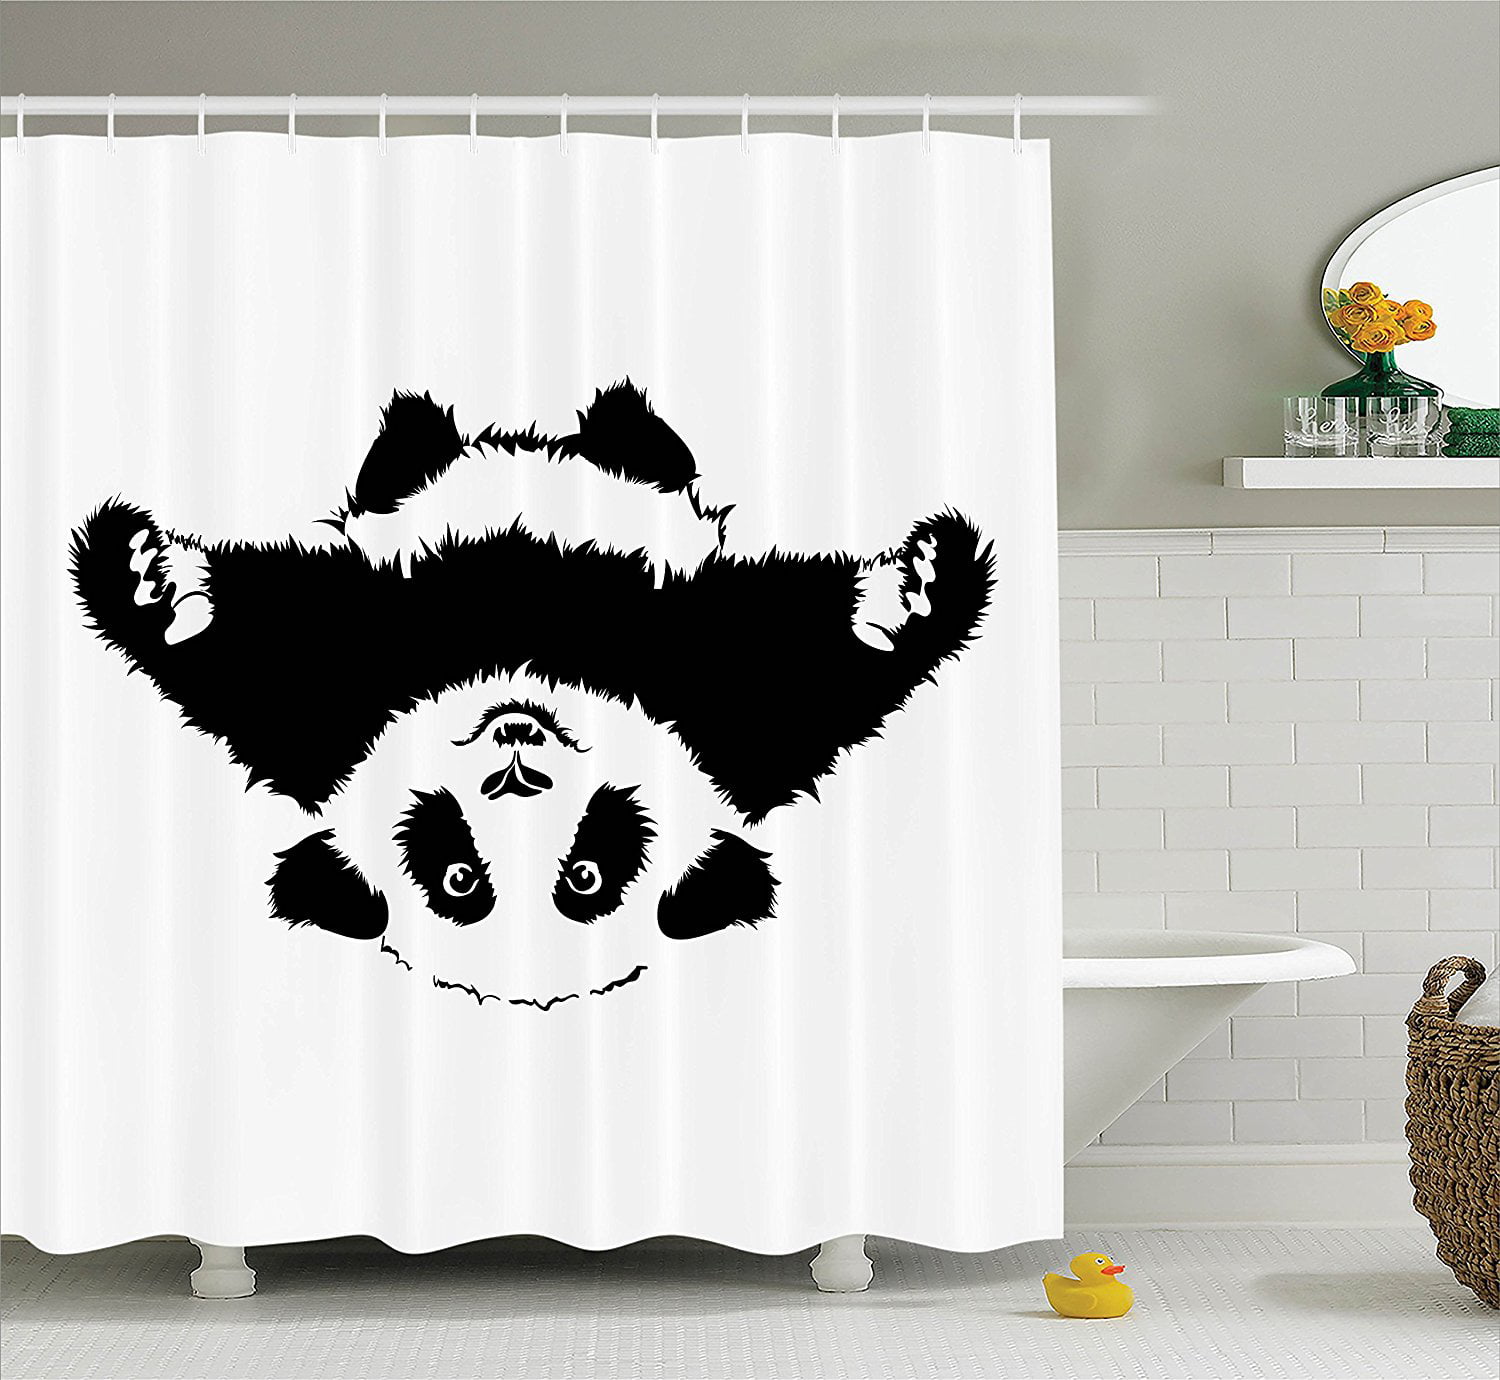 Details about   Black White Graffiti Love Couple Funny Word Waterproof Fabric Shower Curtain Set 